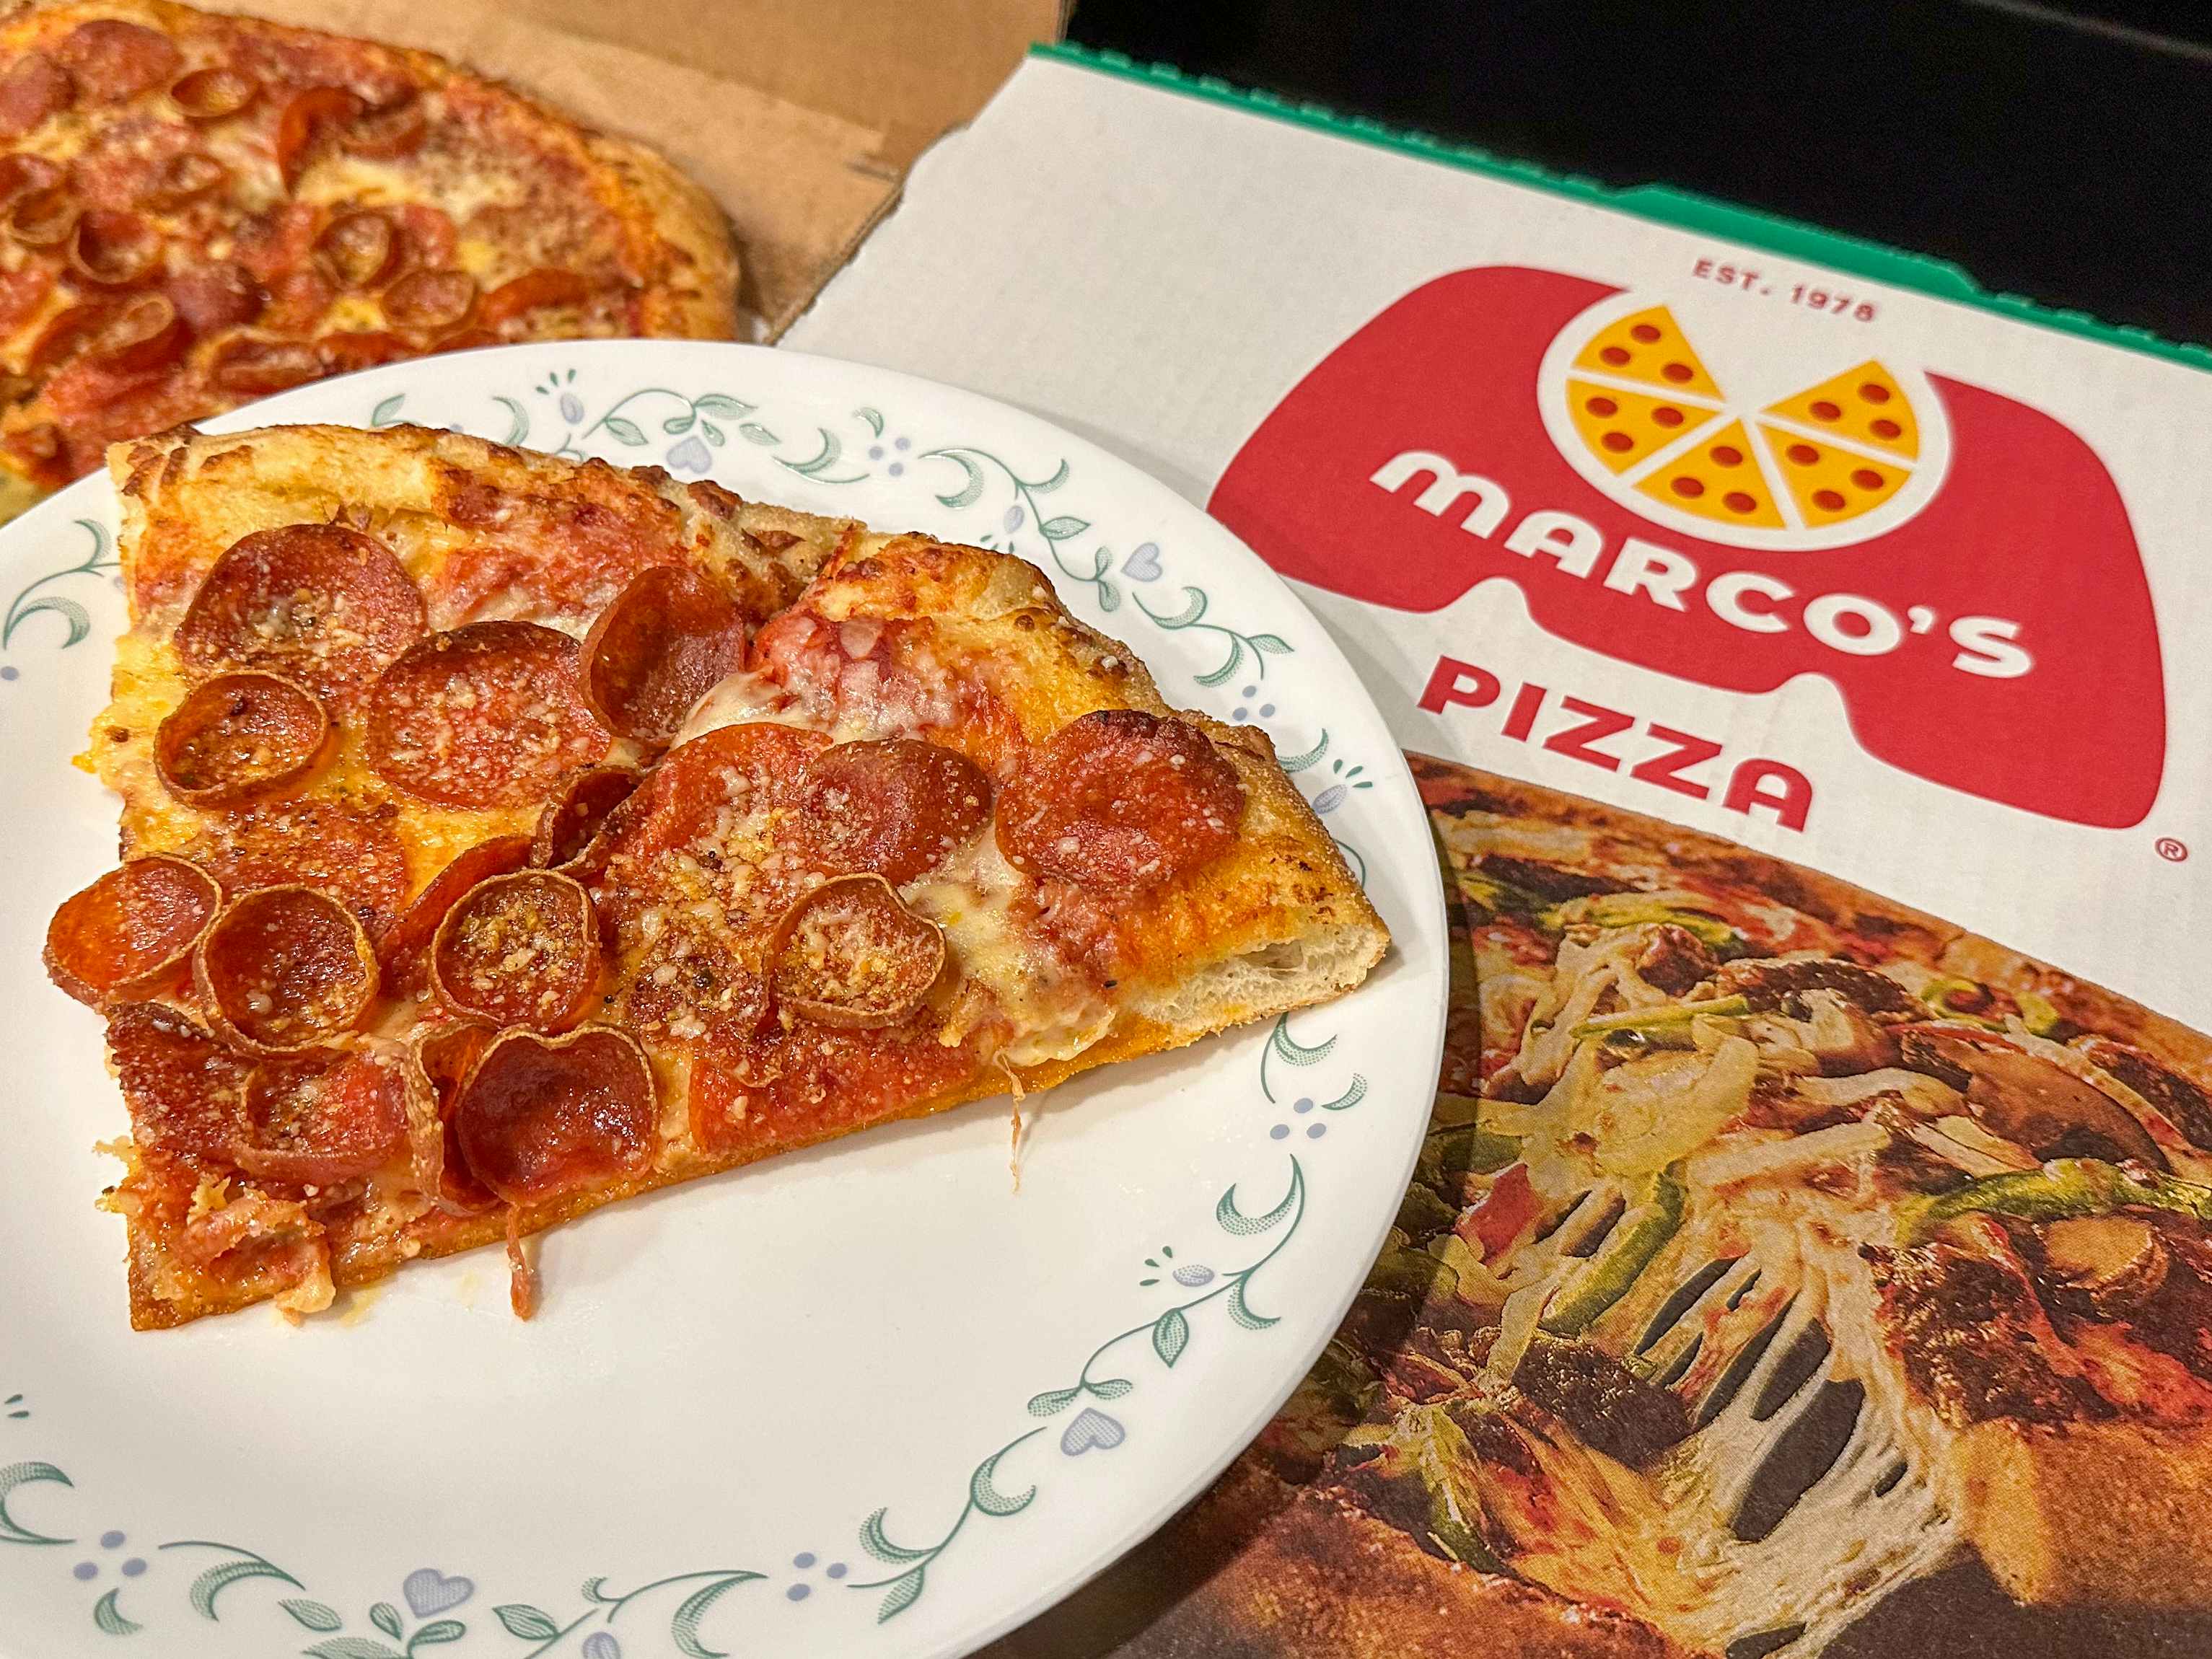 pieces of pizza on a plate on top of a Marco's Pizza box